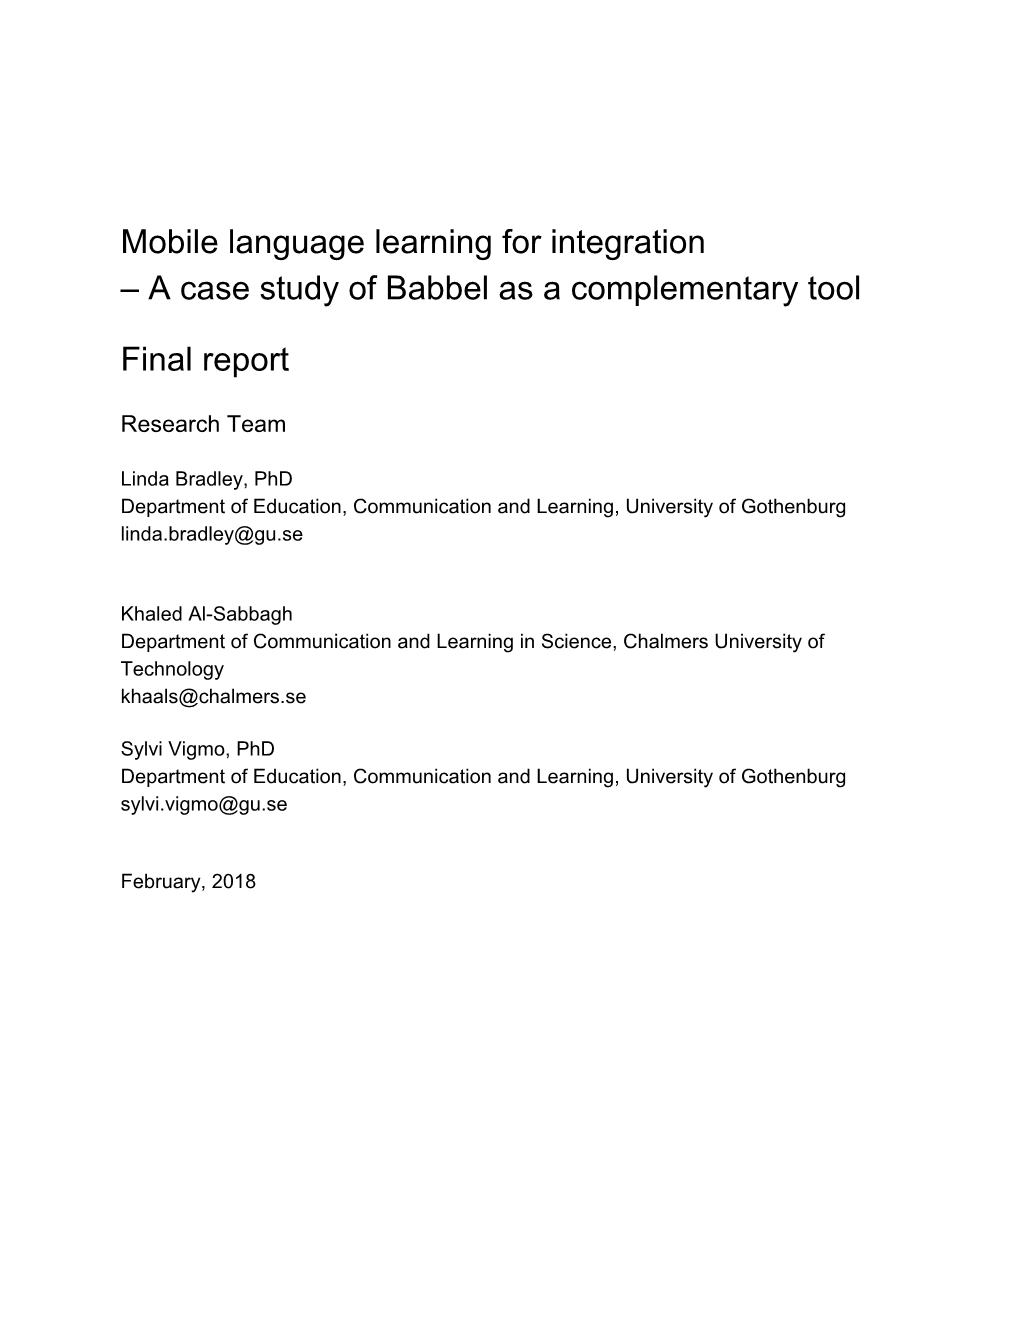 Mobile Language Learning for Integration – a Case Study of Babbel As a Complementary Tool Final Report